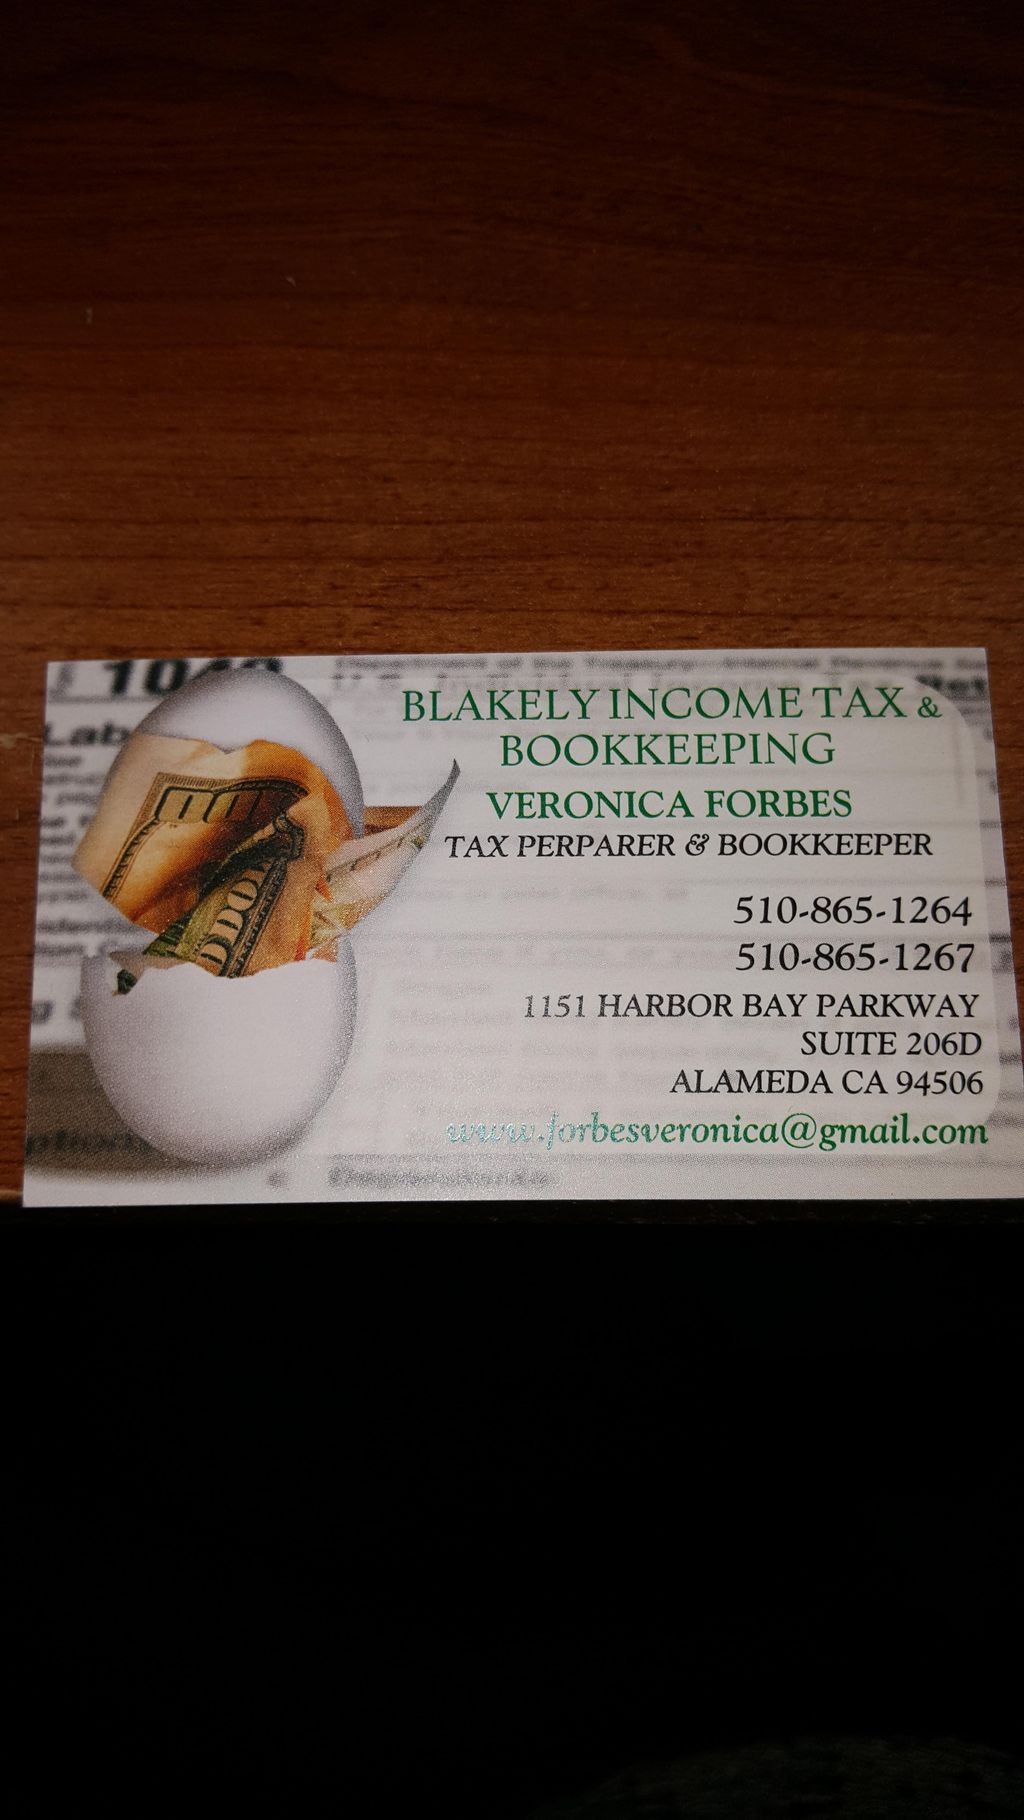 Blakely Income Tax & bookkeeping